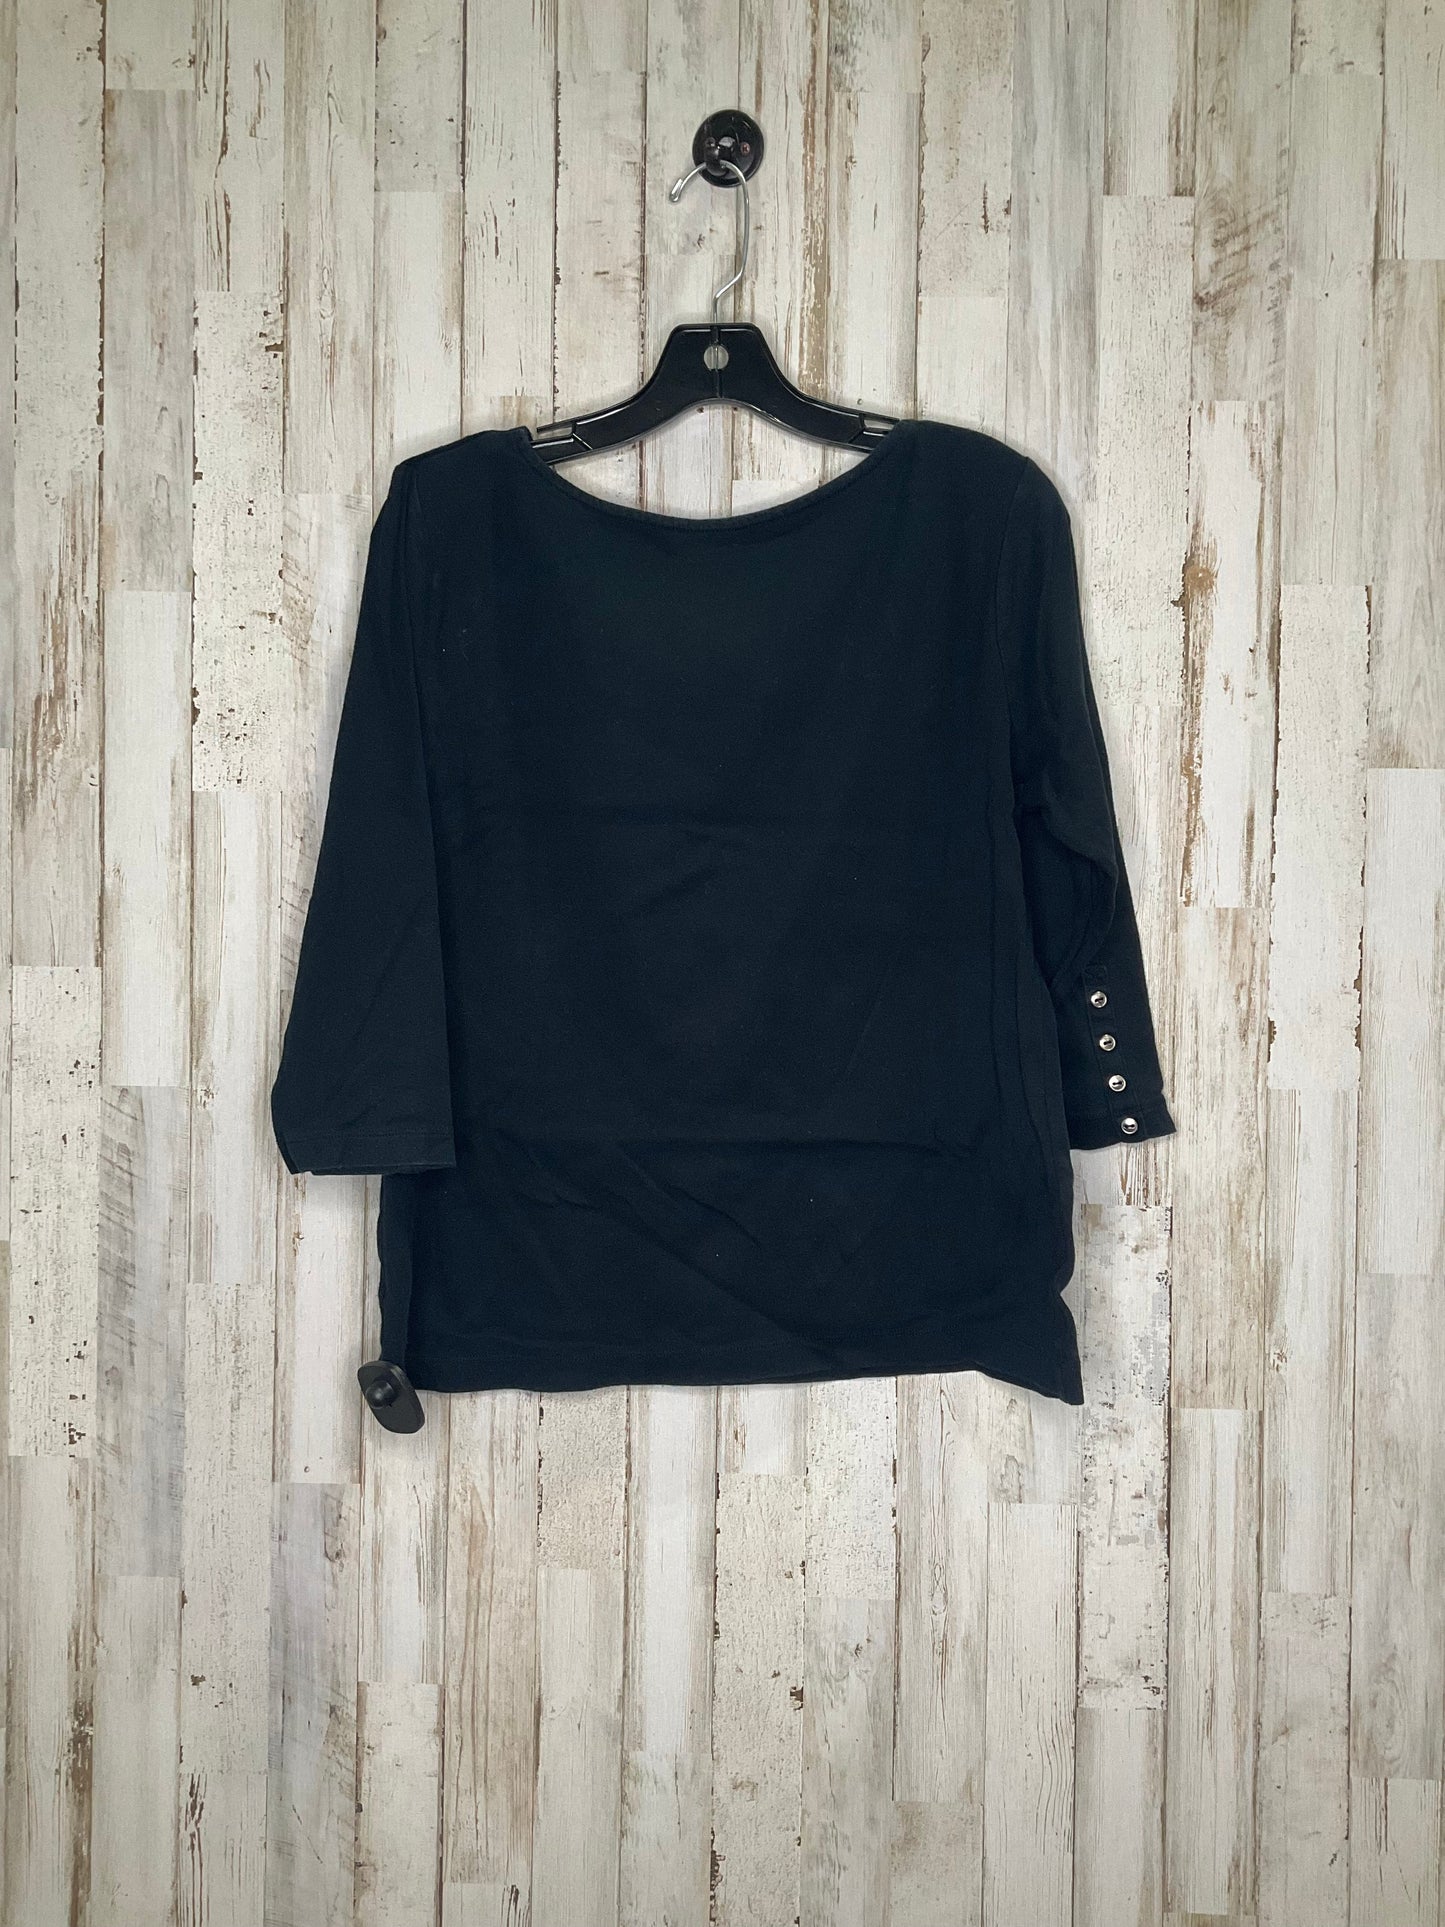 Top Long Sleeve By Croft And Barrow  Size: L